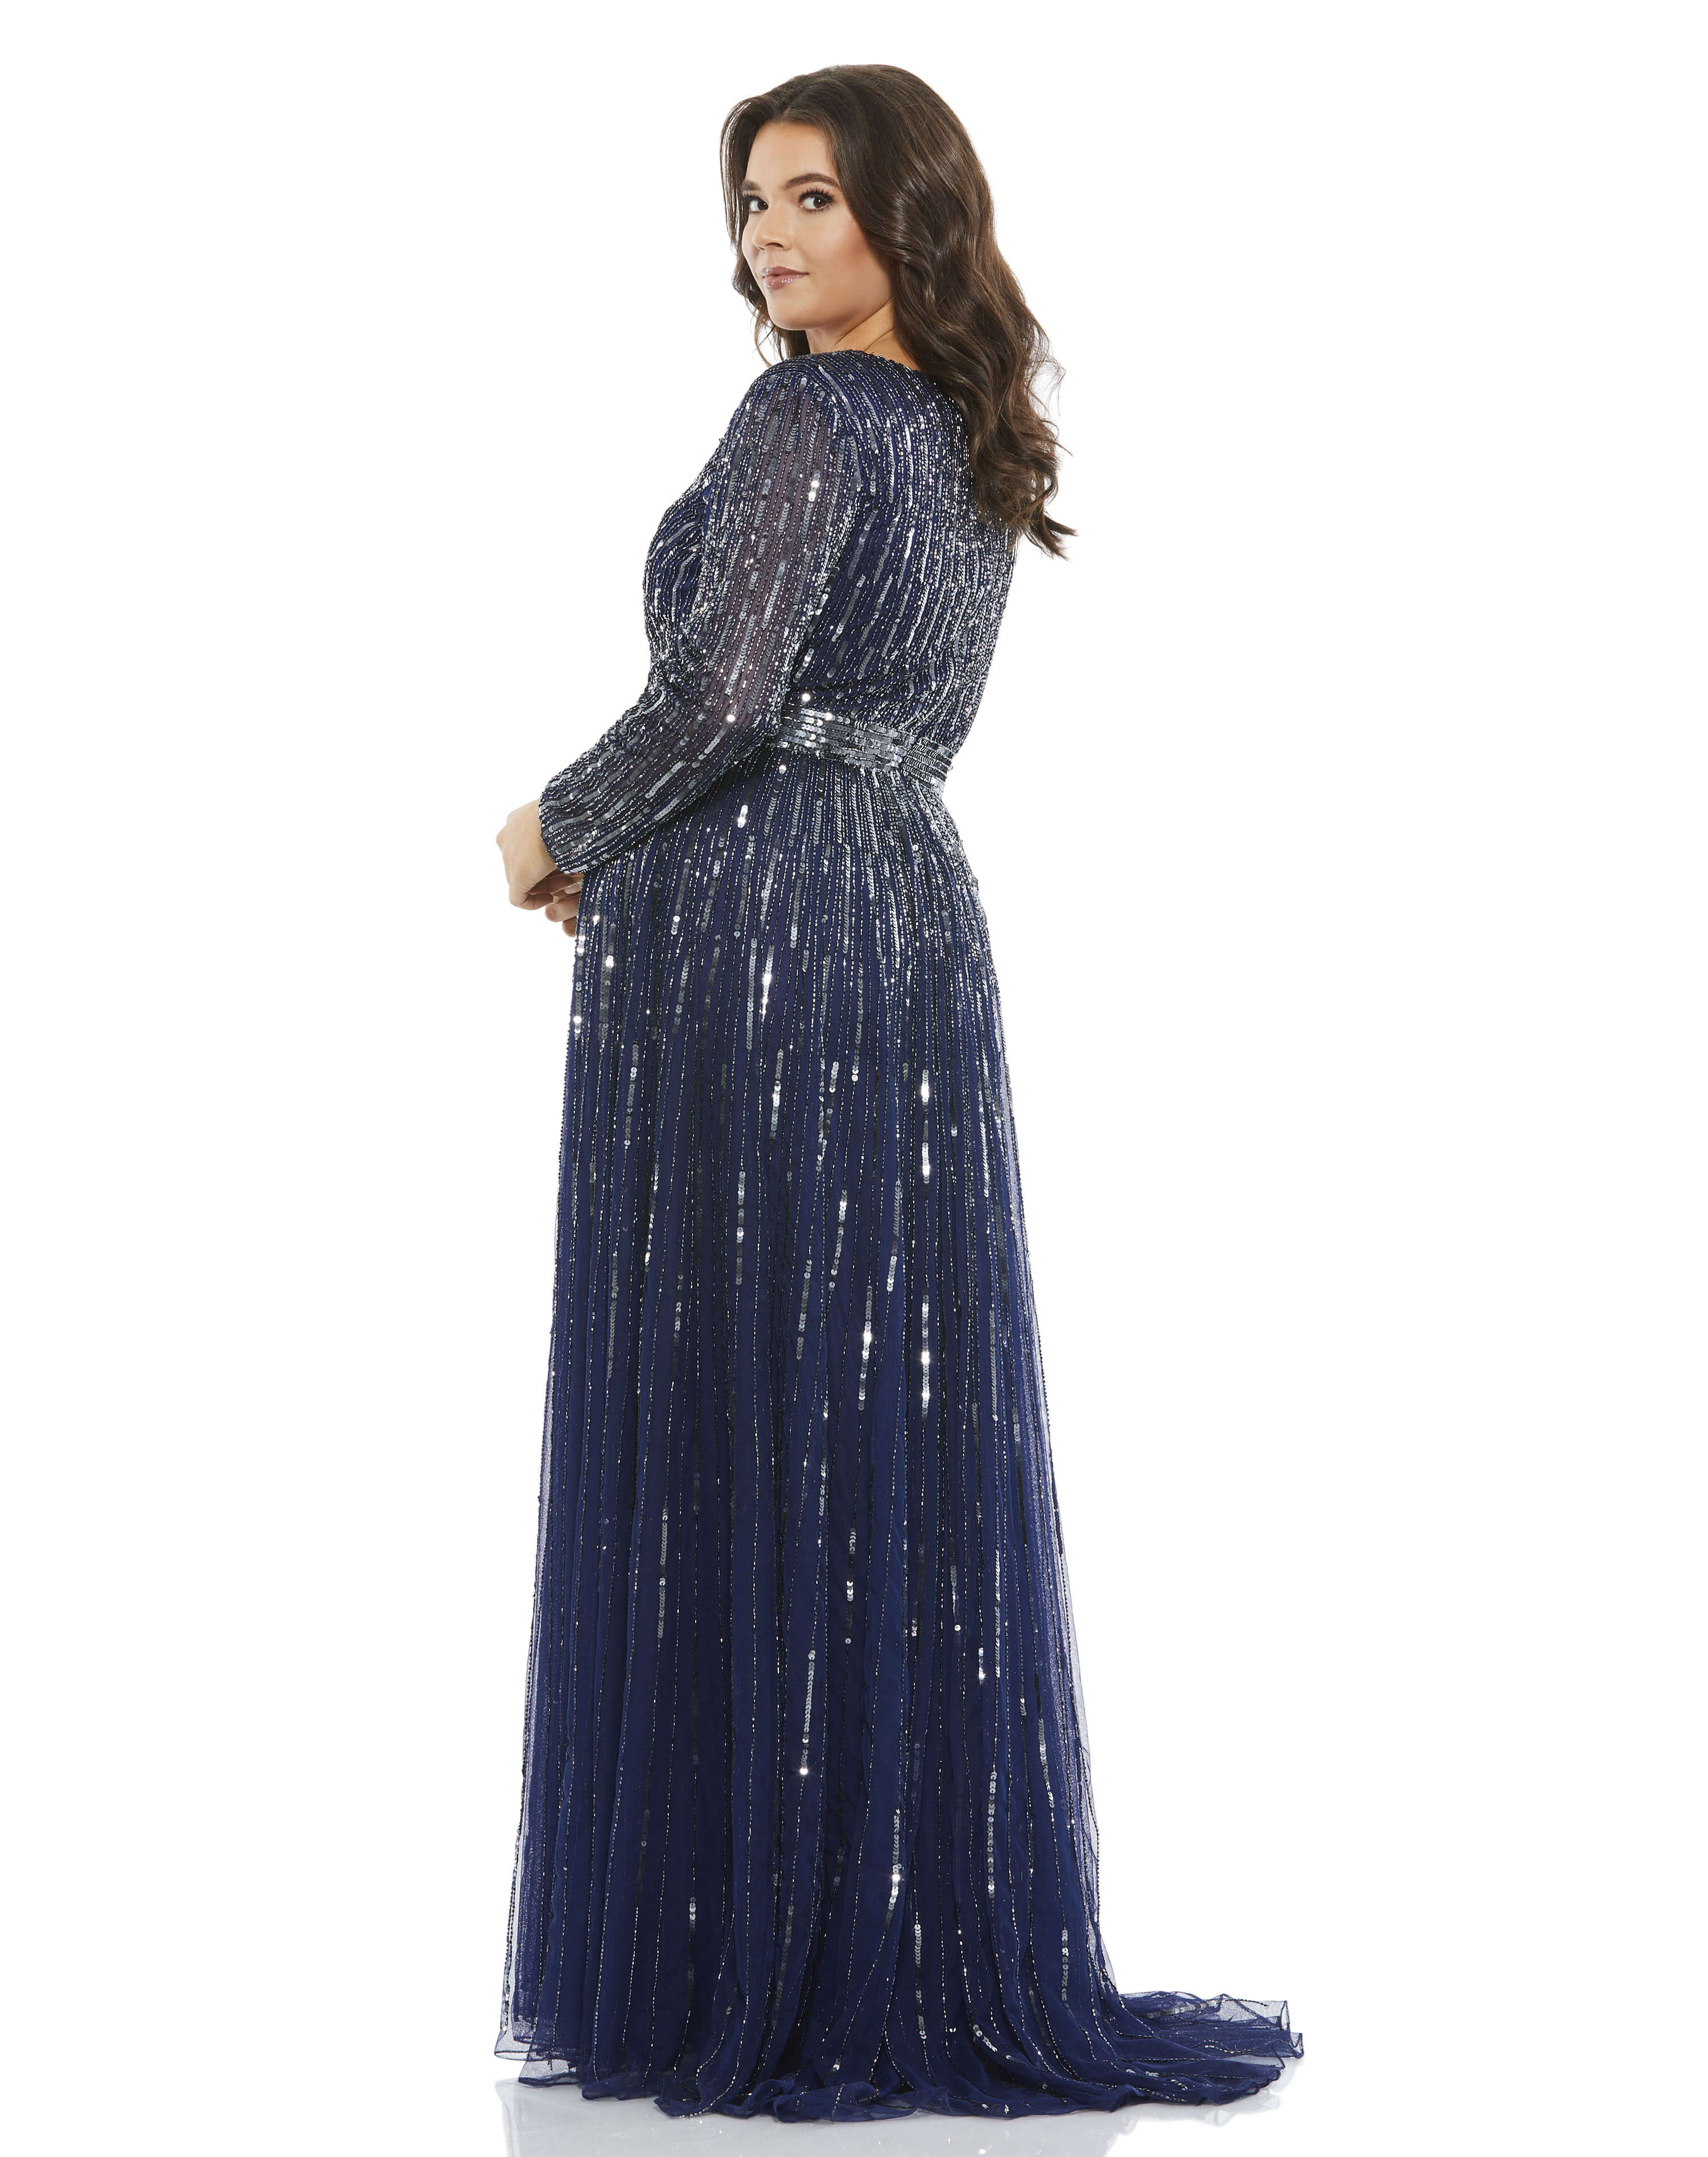 Embellished Illusion Long Sleeve V Neck A Line Gown (Plus)